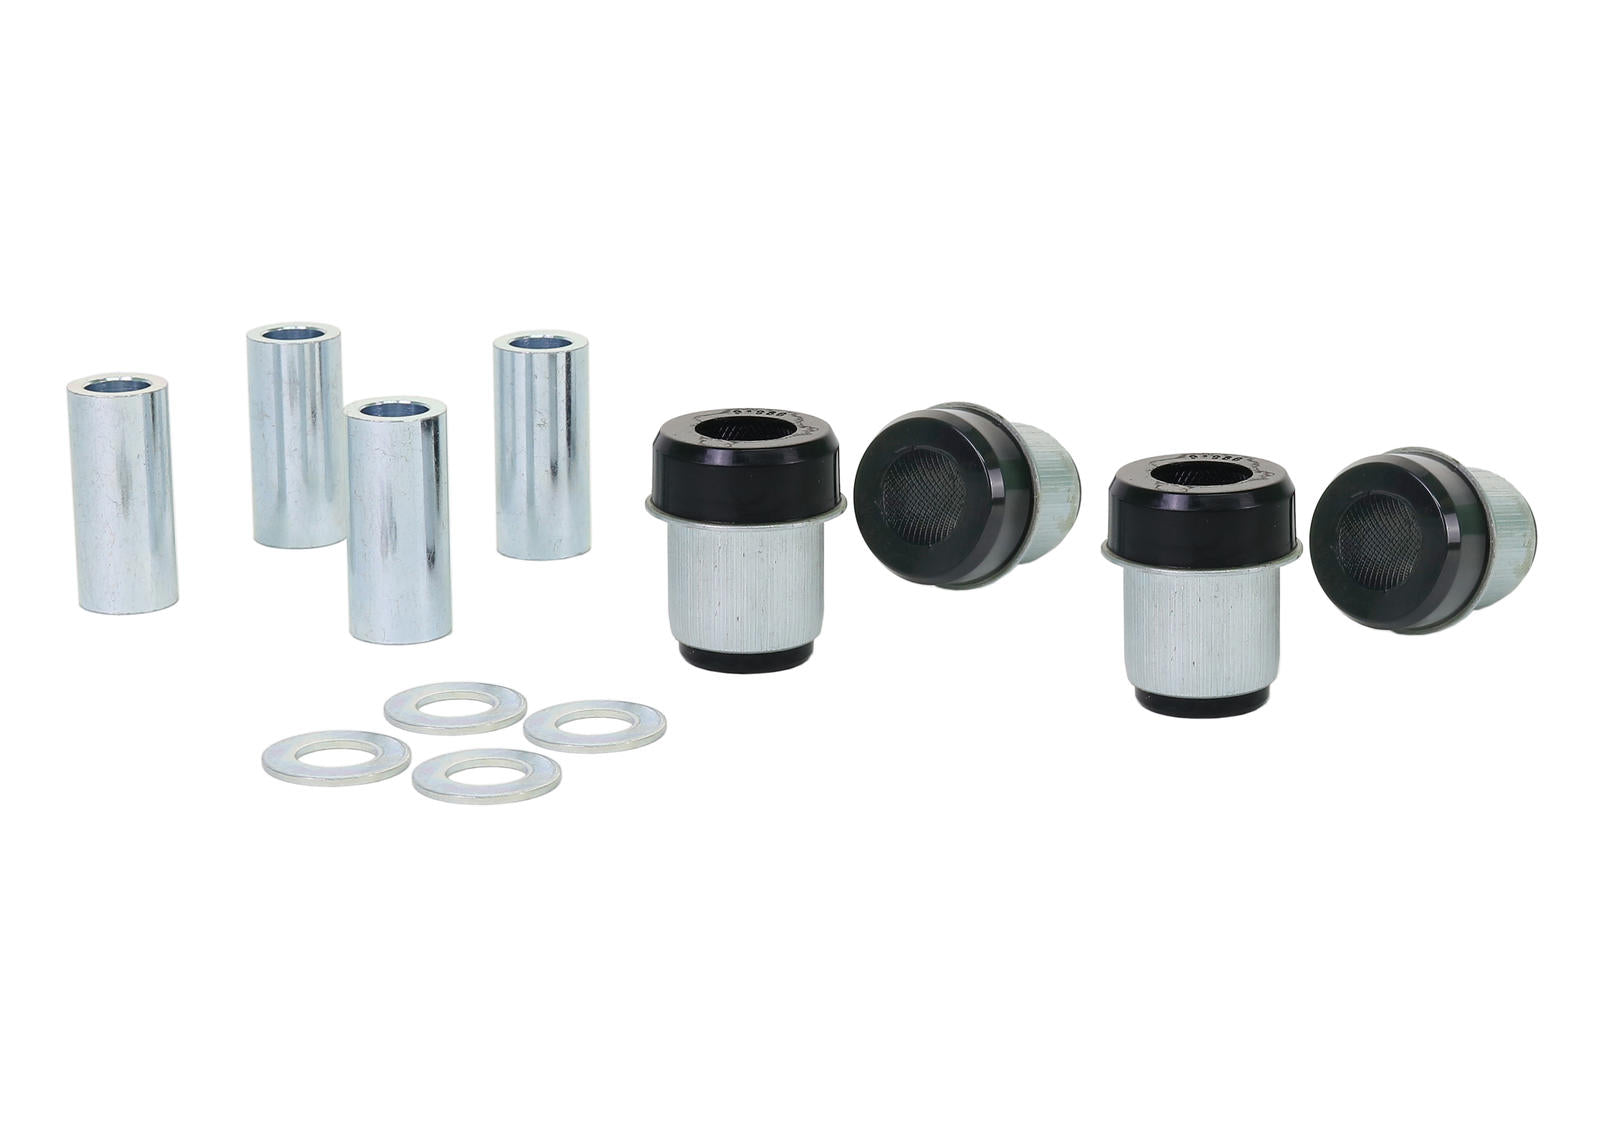 Front Control Arm Upper - Bushing Kit To Suit Ford Ranger PJ, PK And Mazda BT-50 UN 2wd/4wd